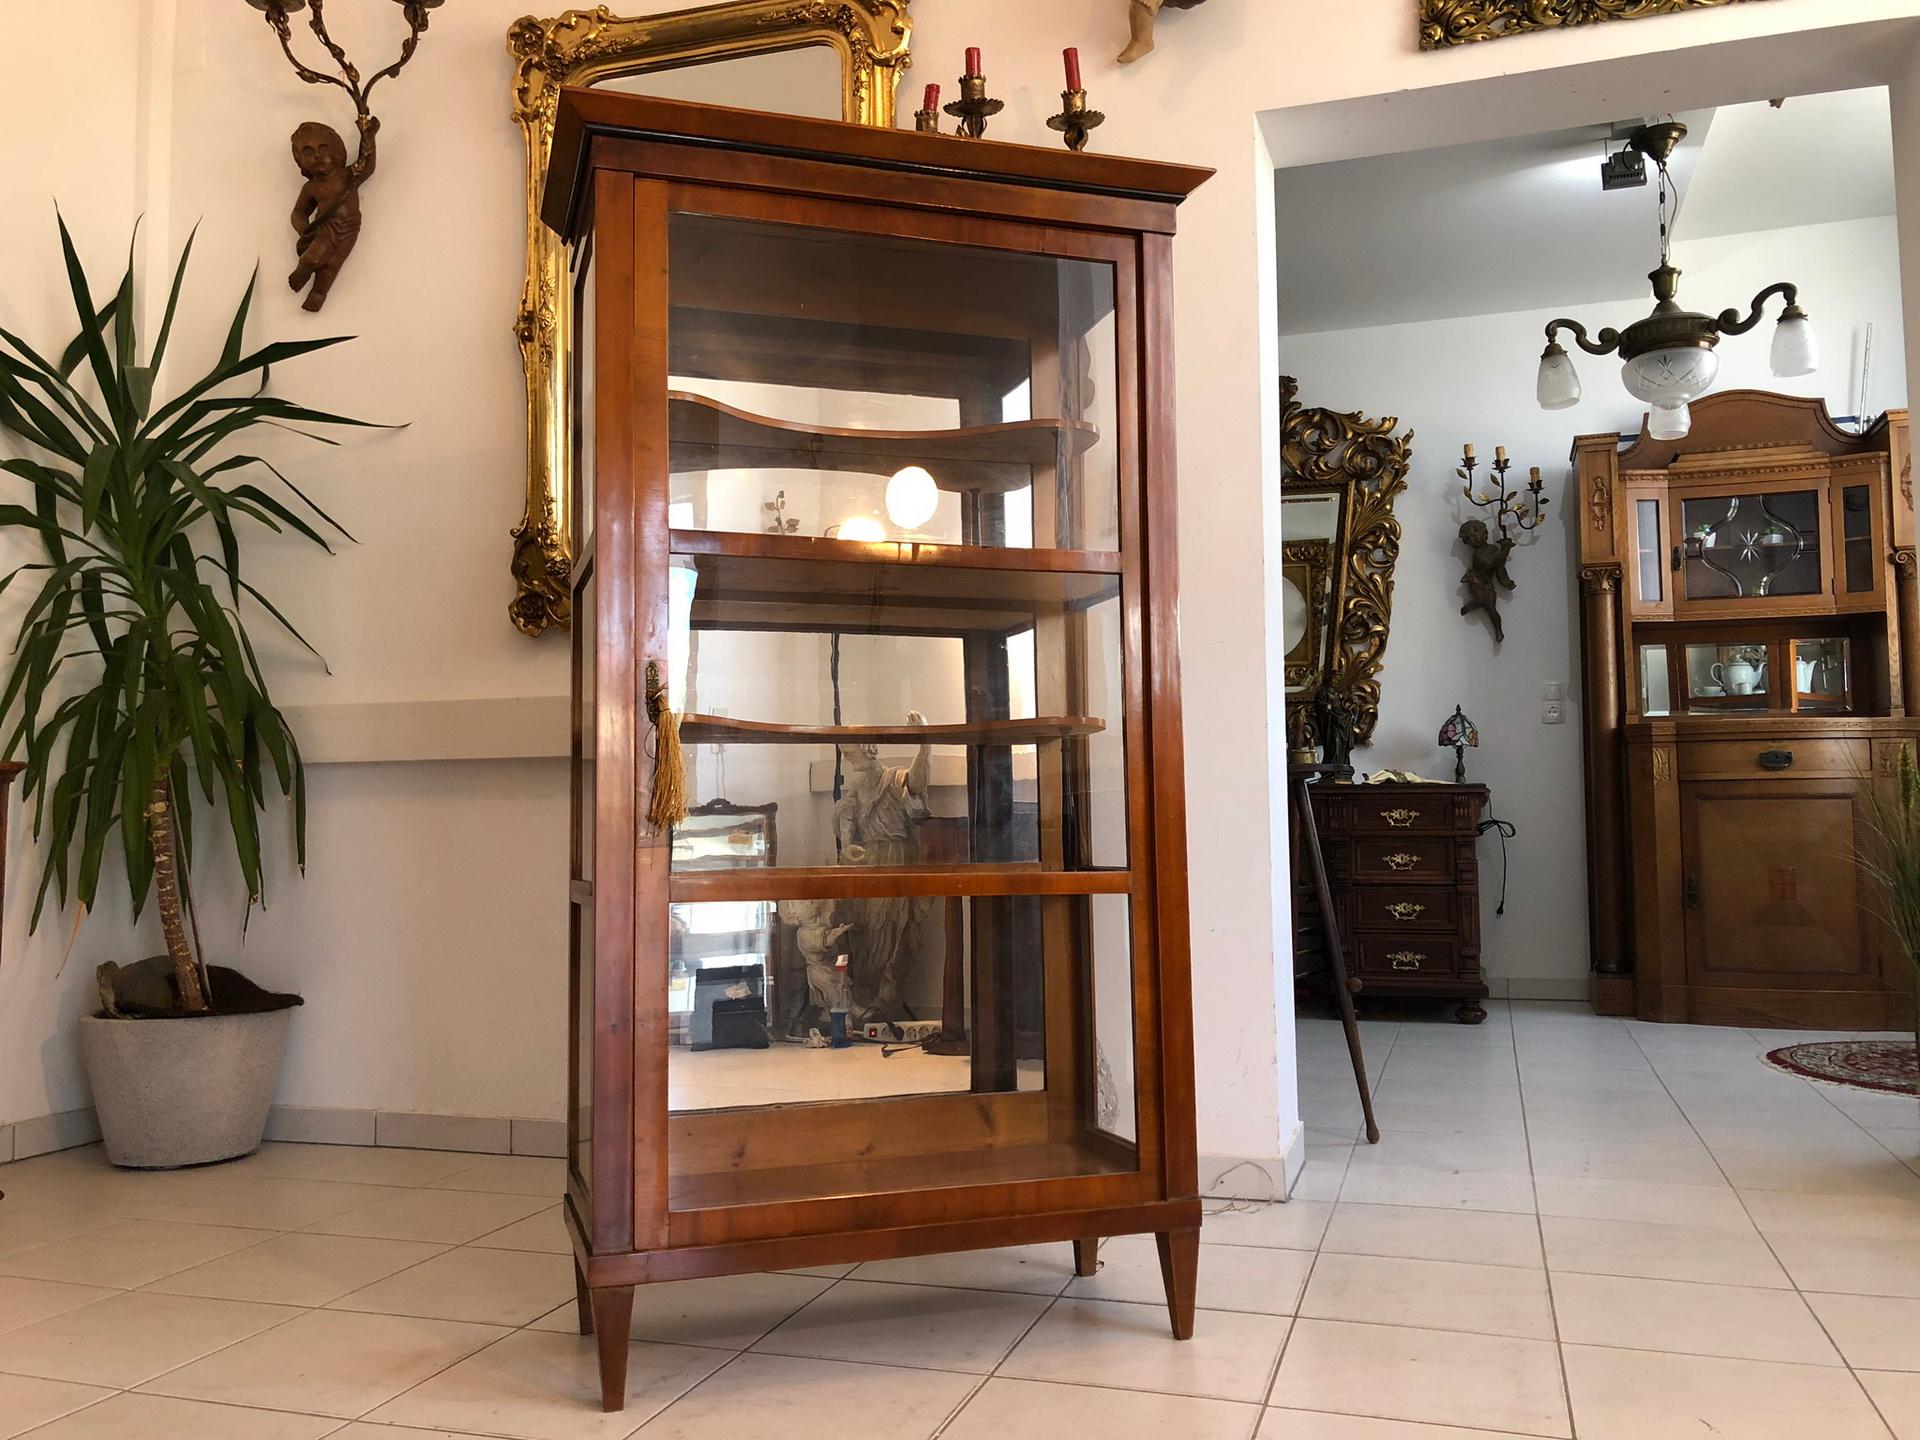 Elegant bookcase or collectors vitrine from the middle of the 19th century. This Biedermeier piece features glass panels all around as well as four shelves to showcase your collectors items or books. Offers a typical Biedermeier design with conical